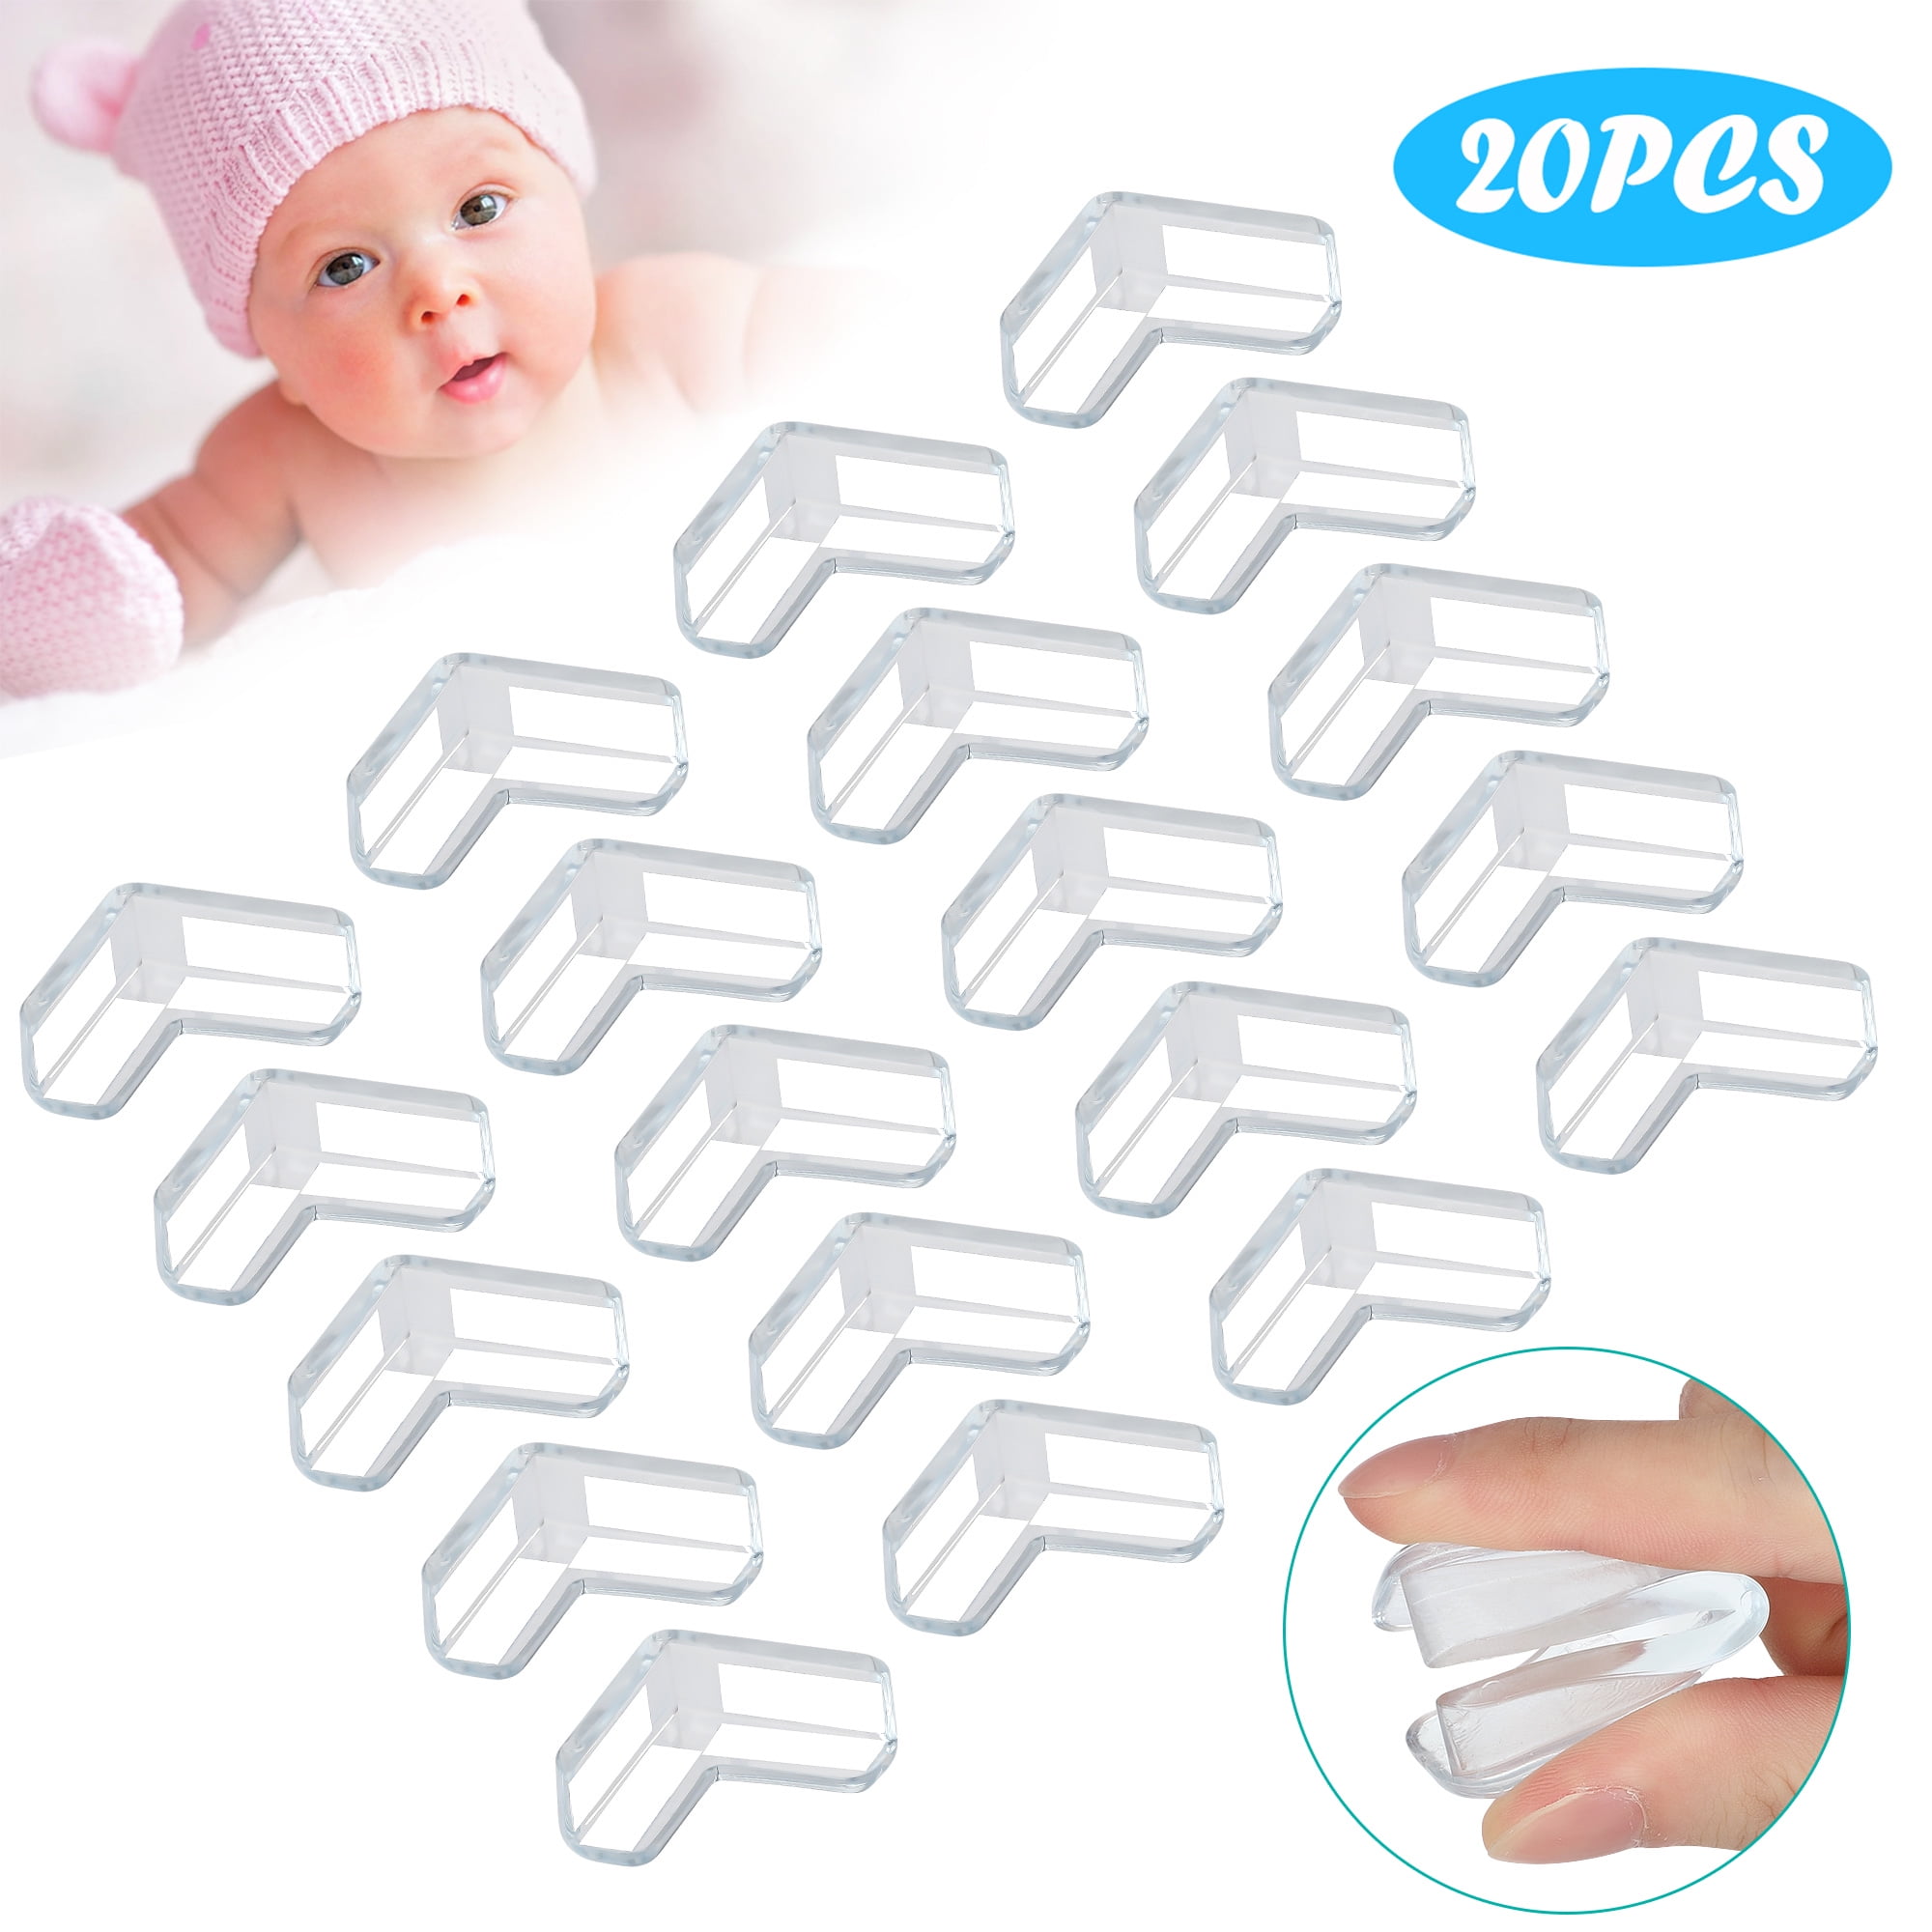 Edge Lining Safety Guards for Child Safety - Baby-Proof Head